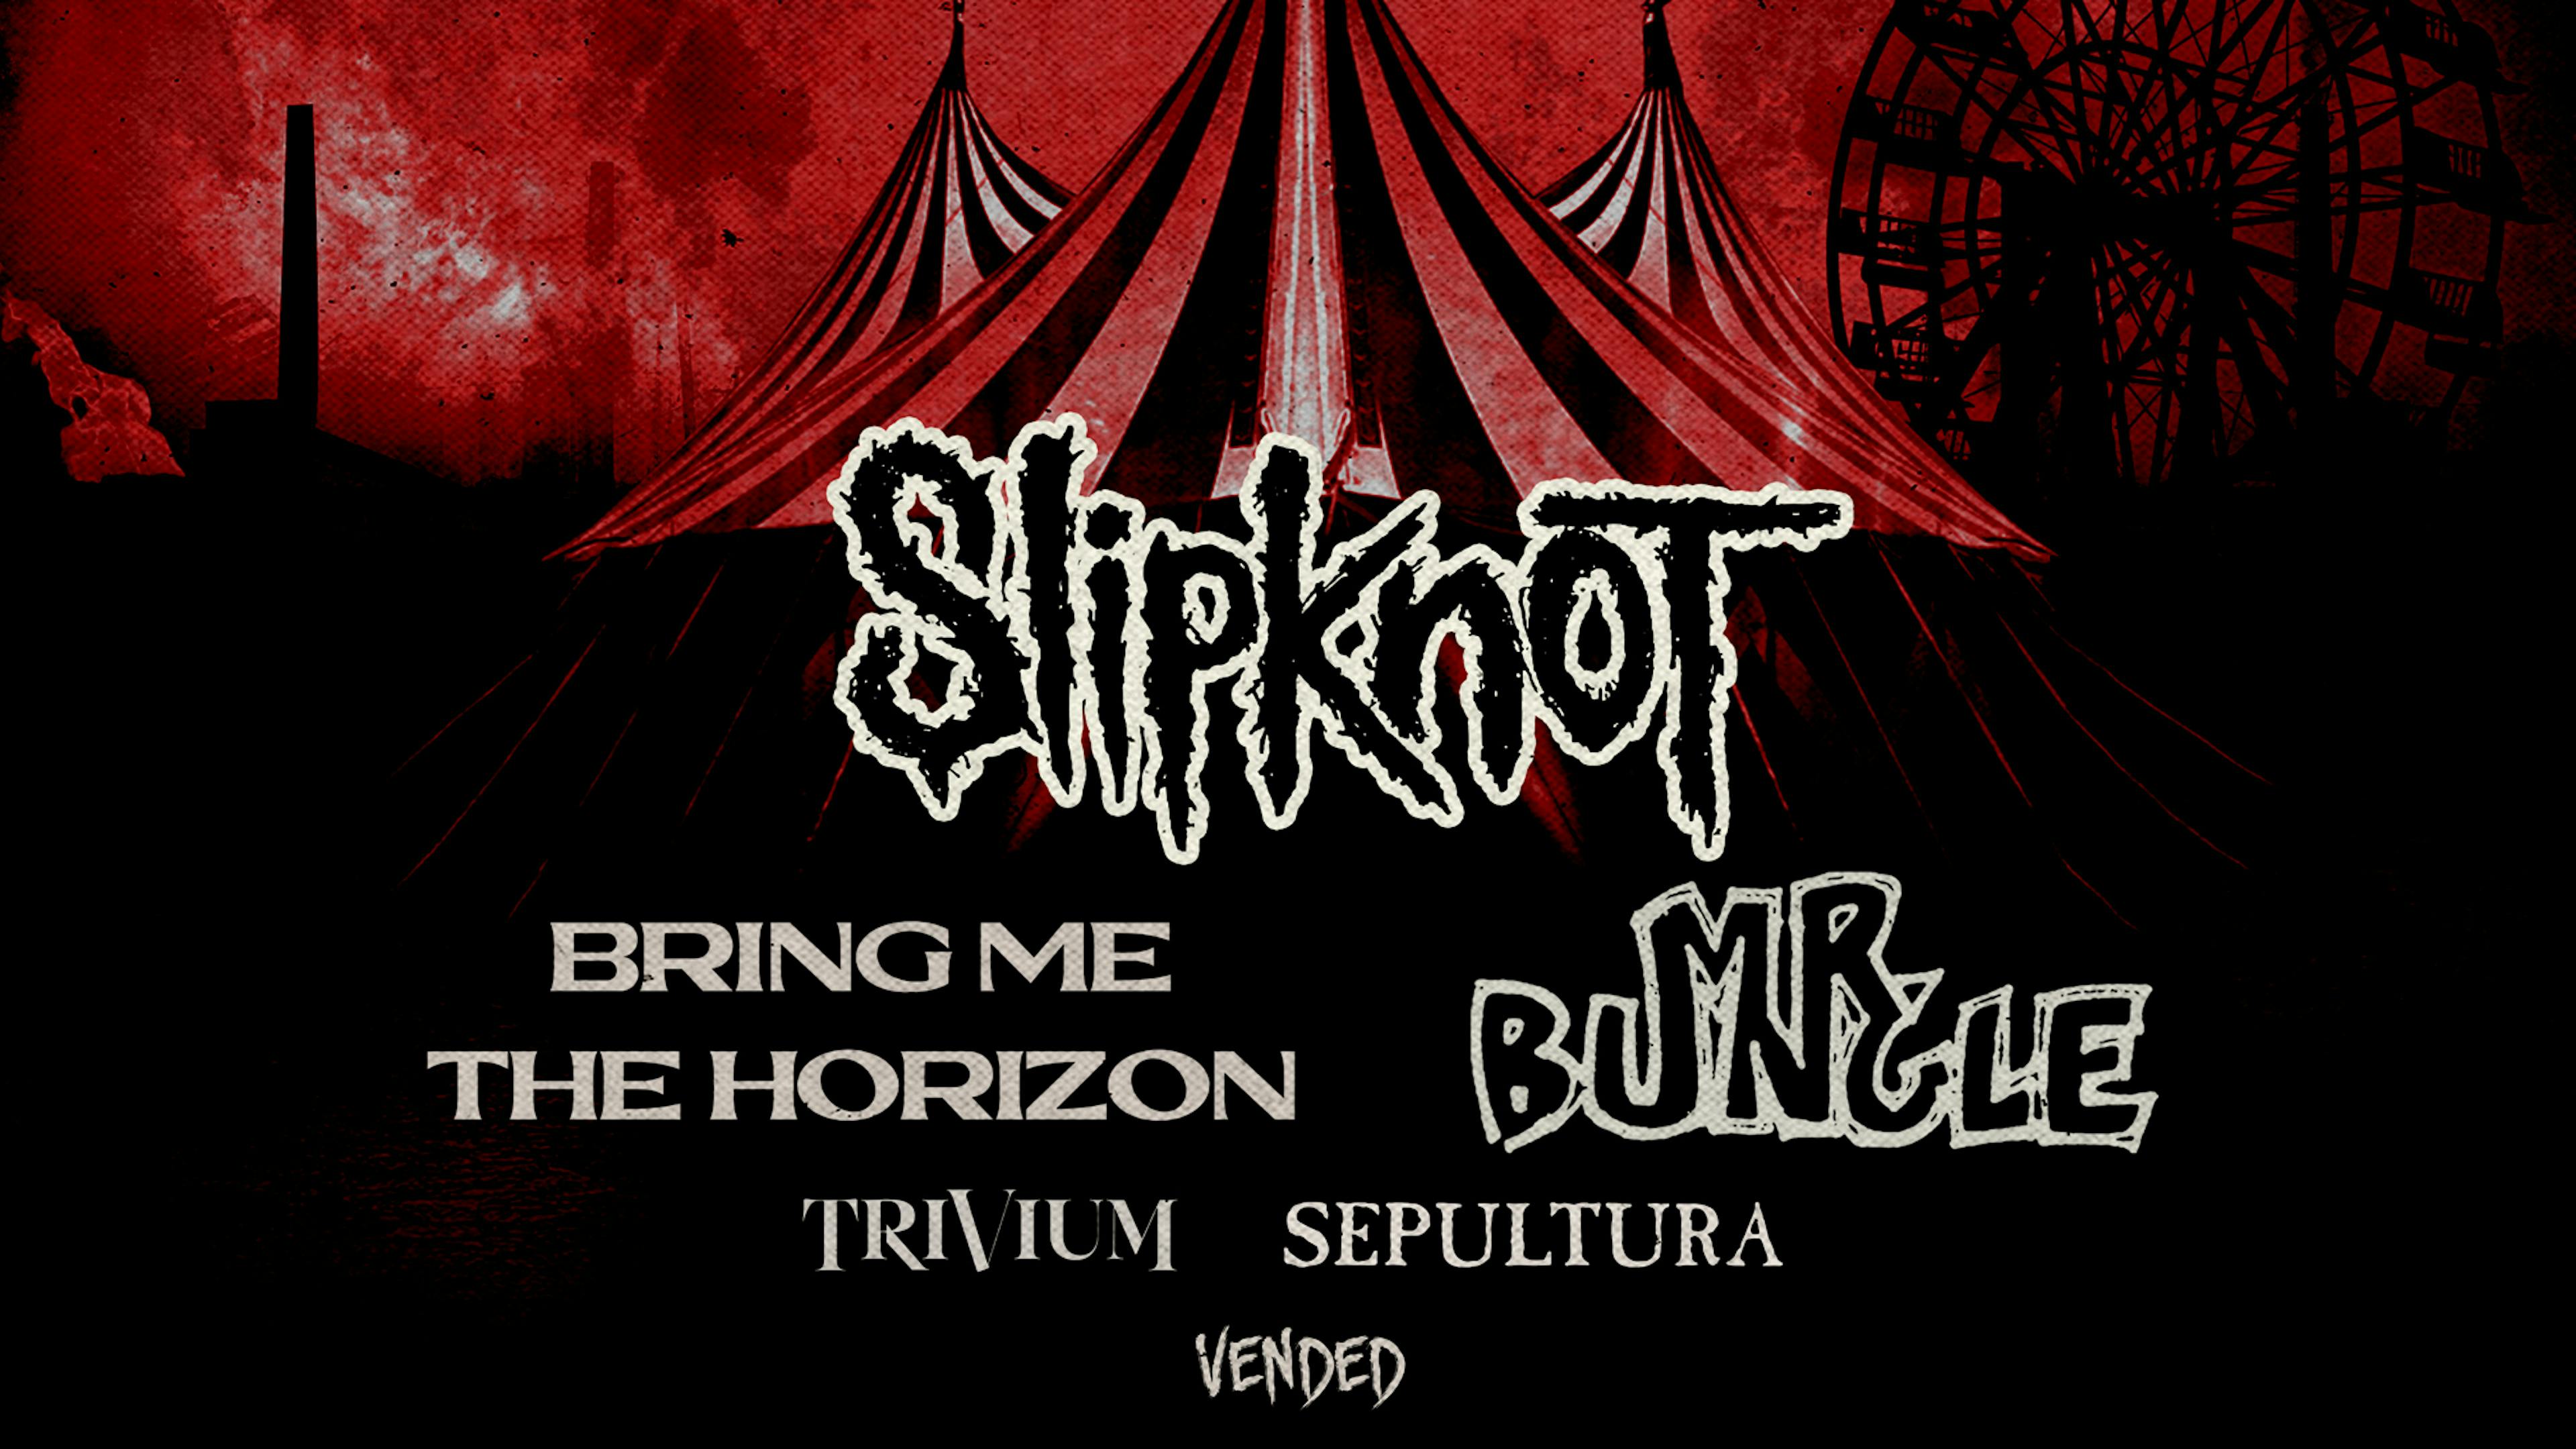 Slipknot, Bring Me The Horizon, Mr. Bungle and more for South American Knotfest dates